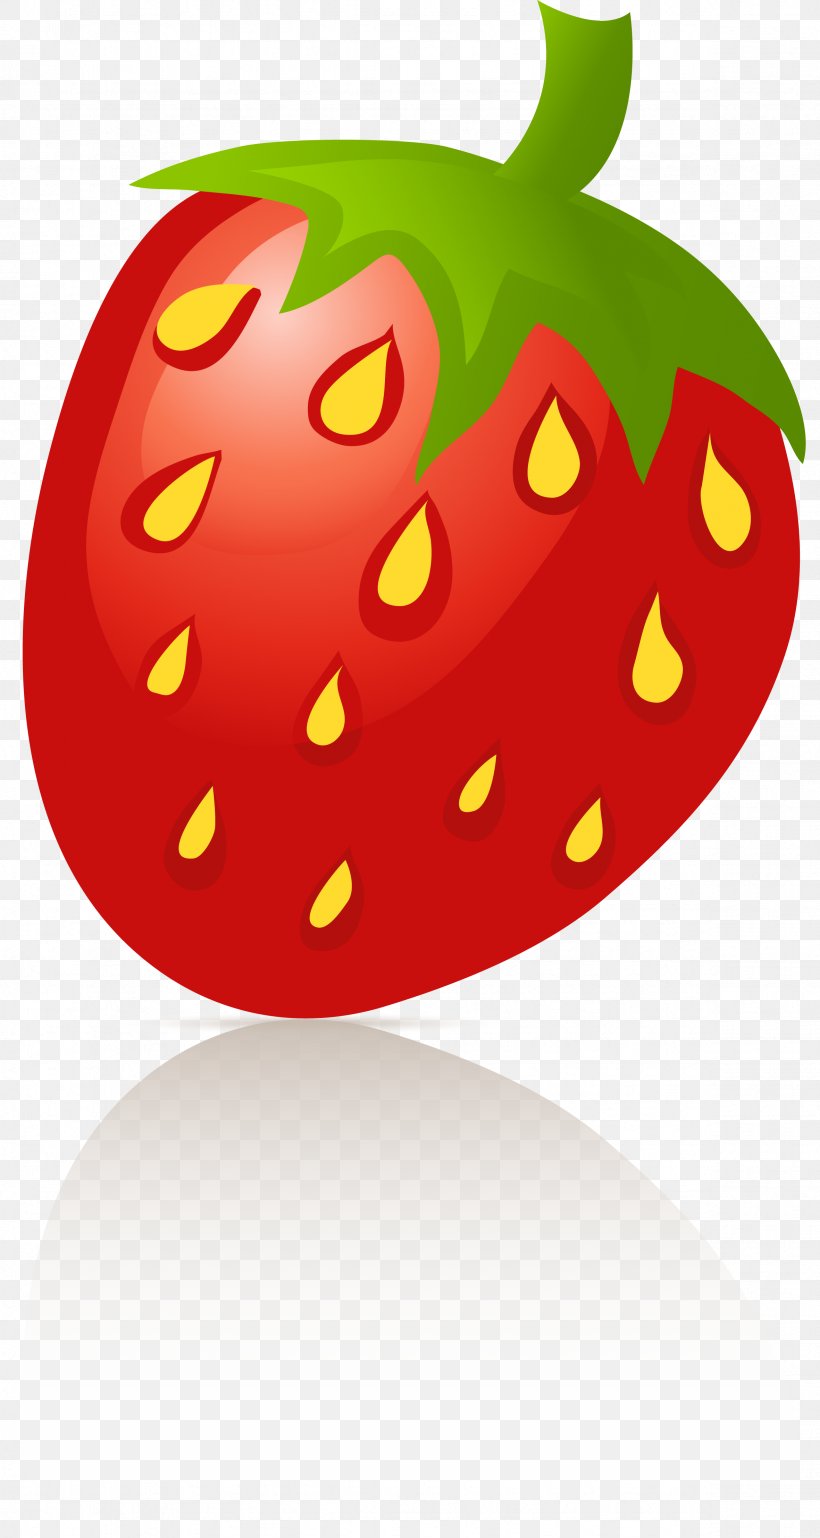 Strawberry Sigel Bell Pepper Clip Art, PNG, 2362x4433px, Strawberry, Apple, Bell Pepper, Bell Peppers And Chili Peppers, Capsicum Download Free